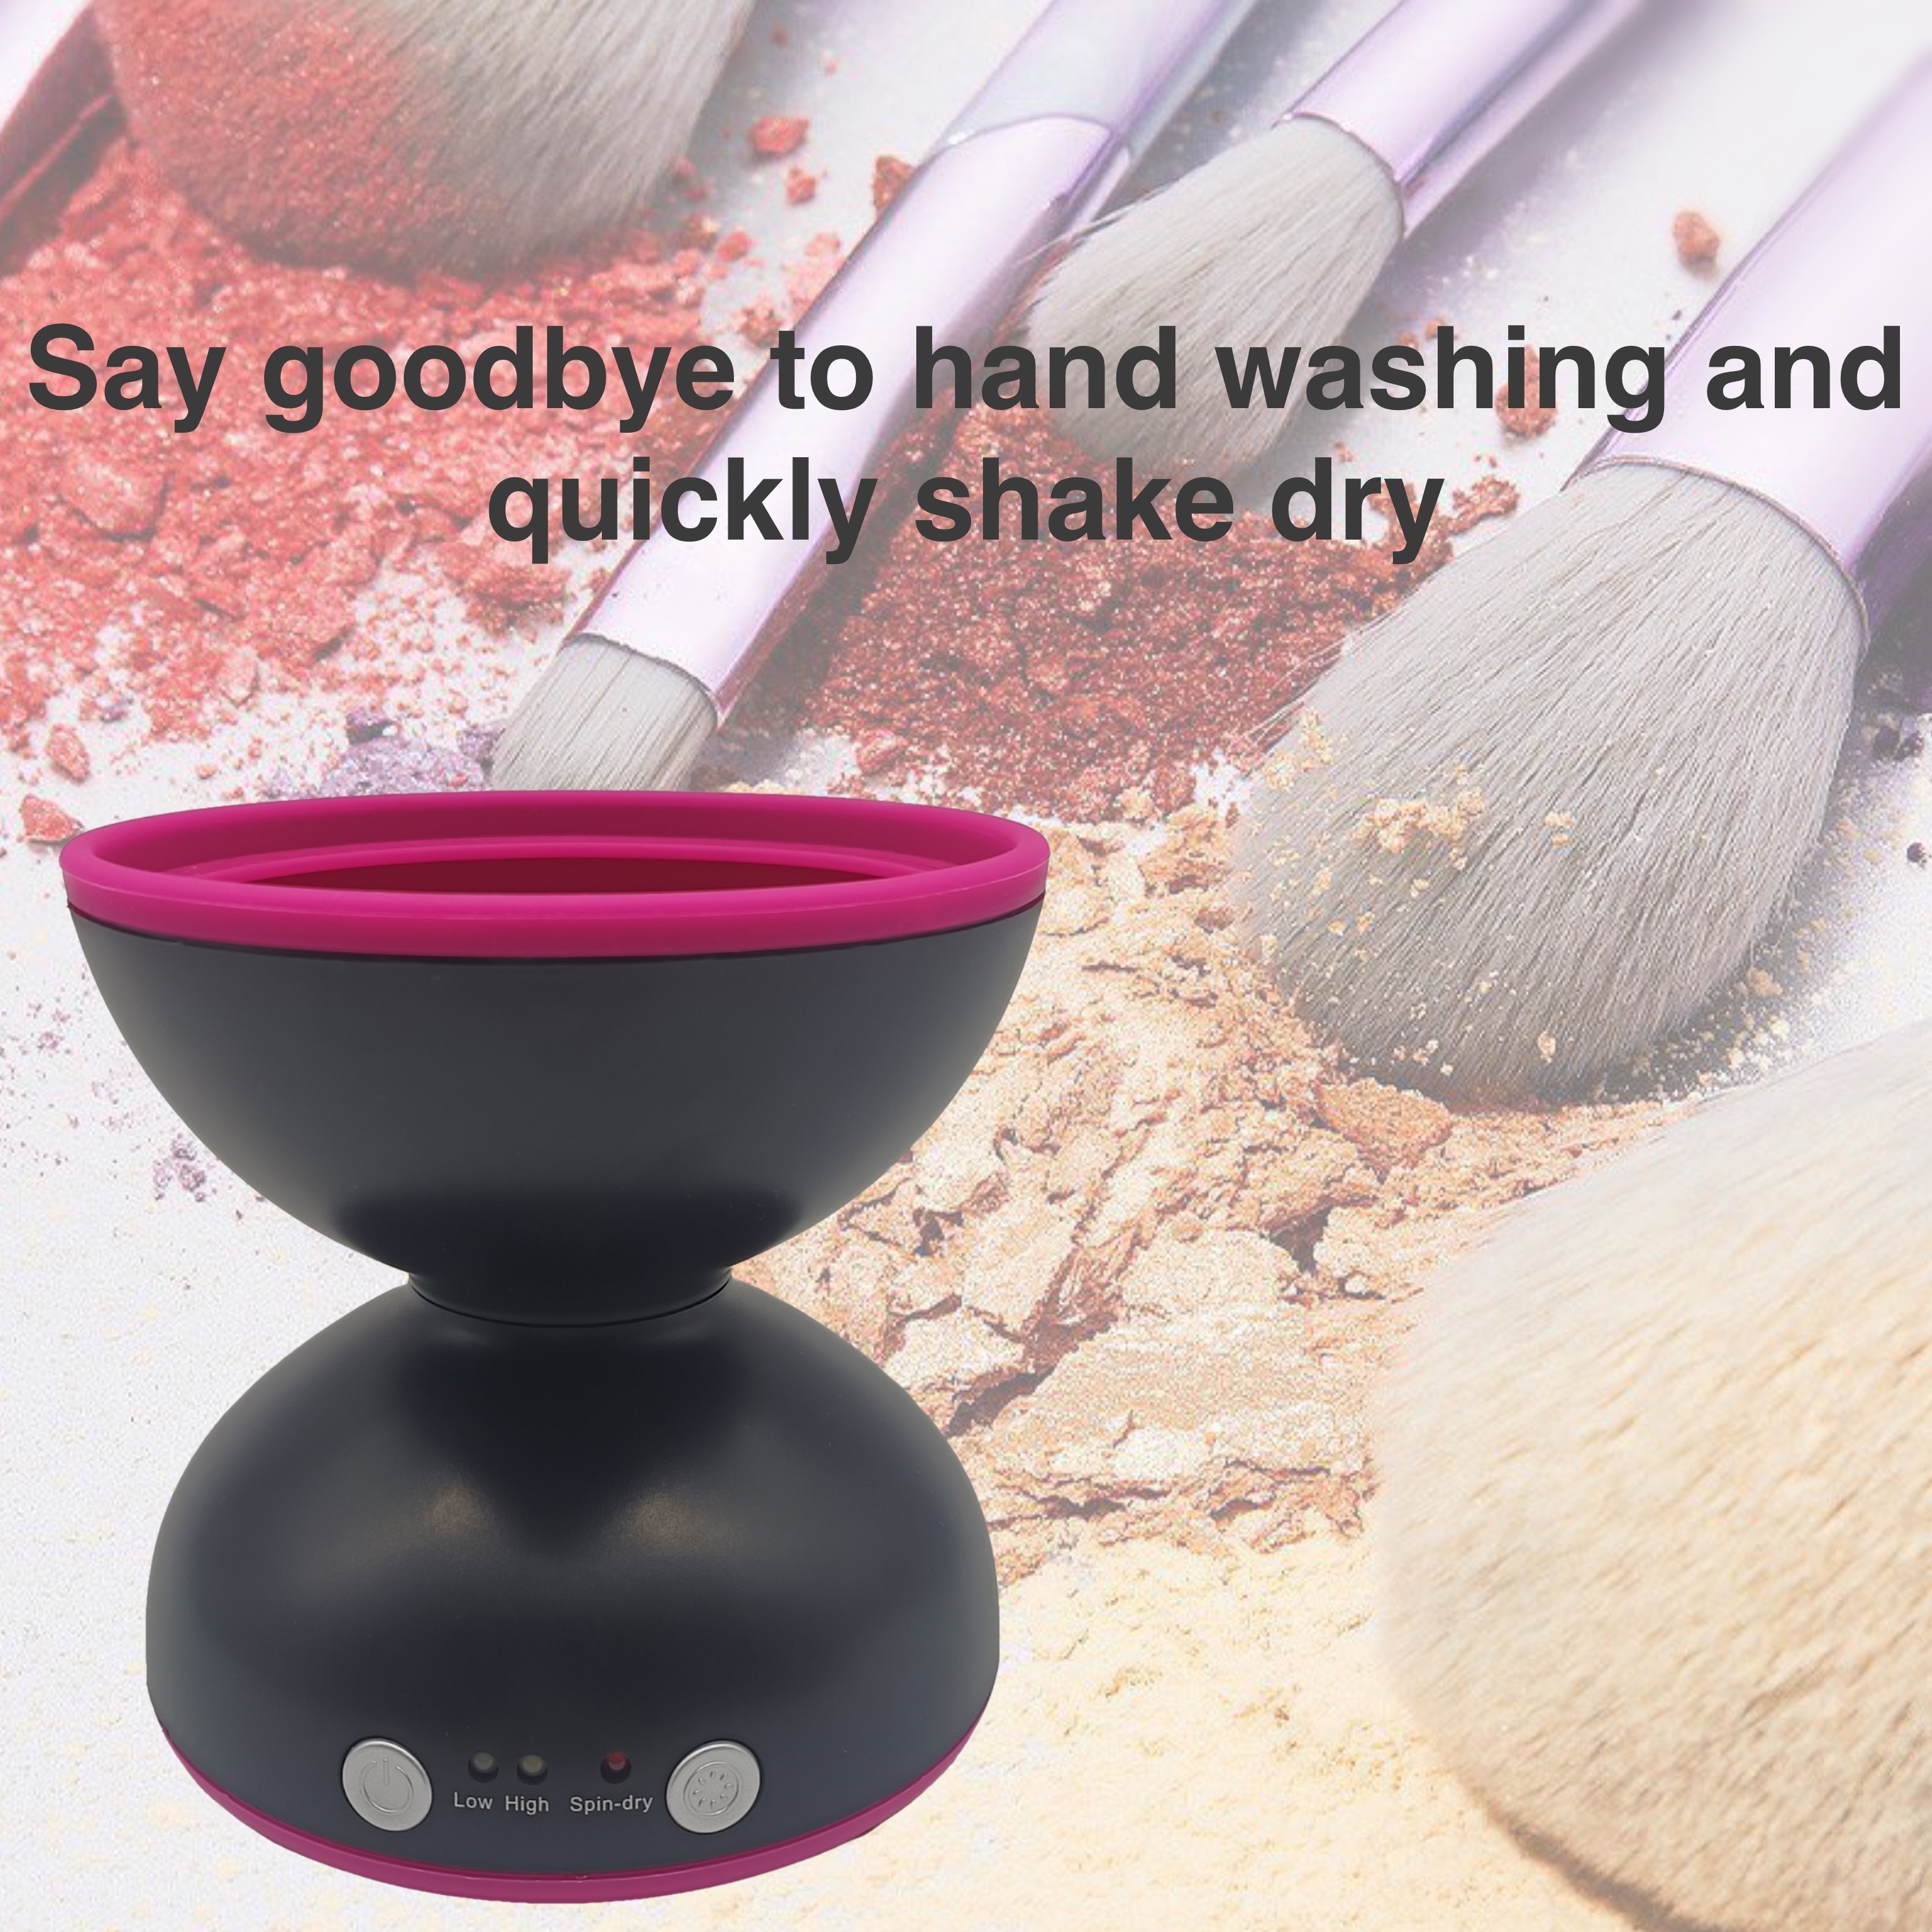 Electric Makeup Brush Cleaner, Fit For All Size Brushes Automatic